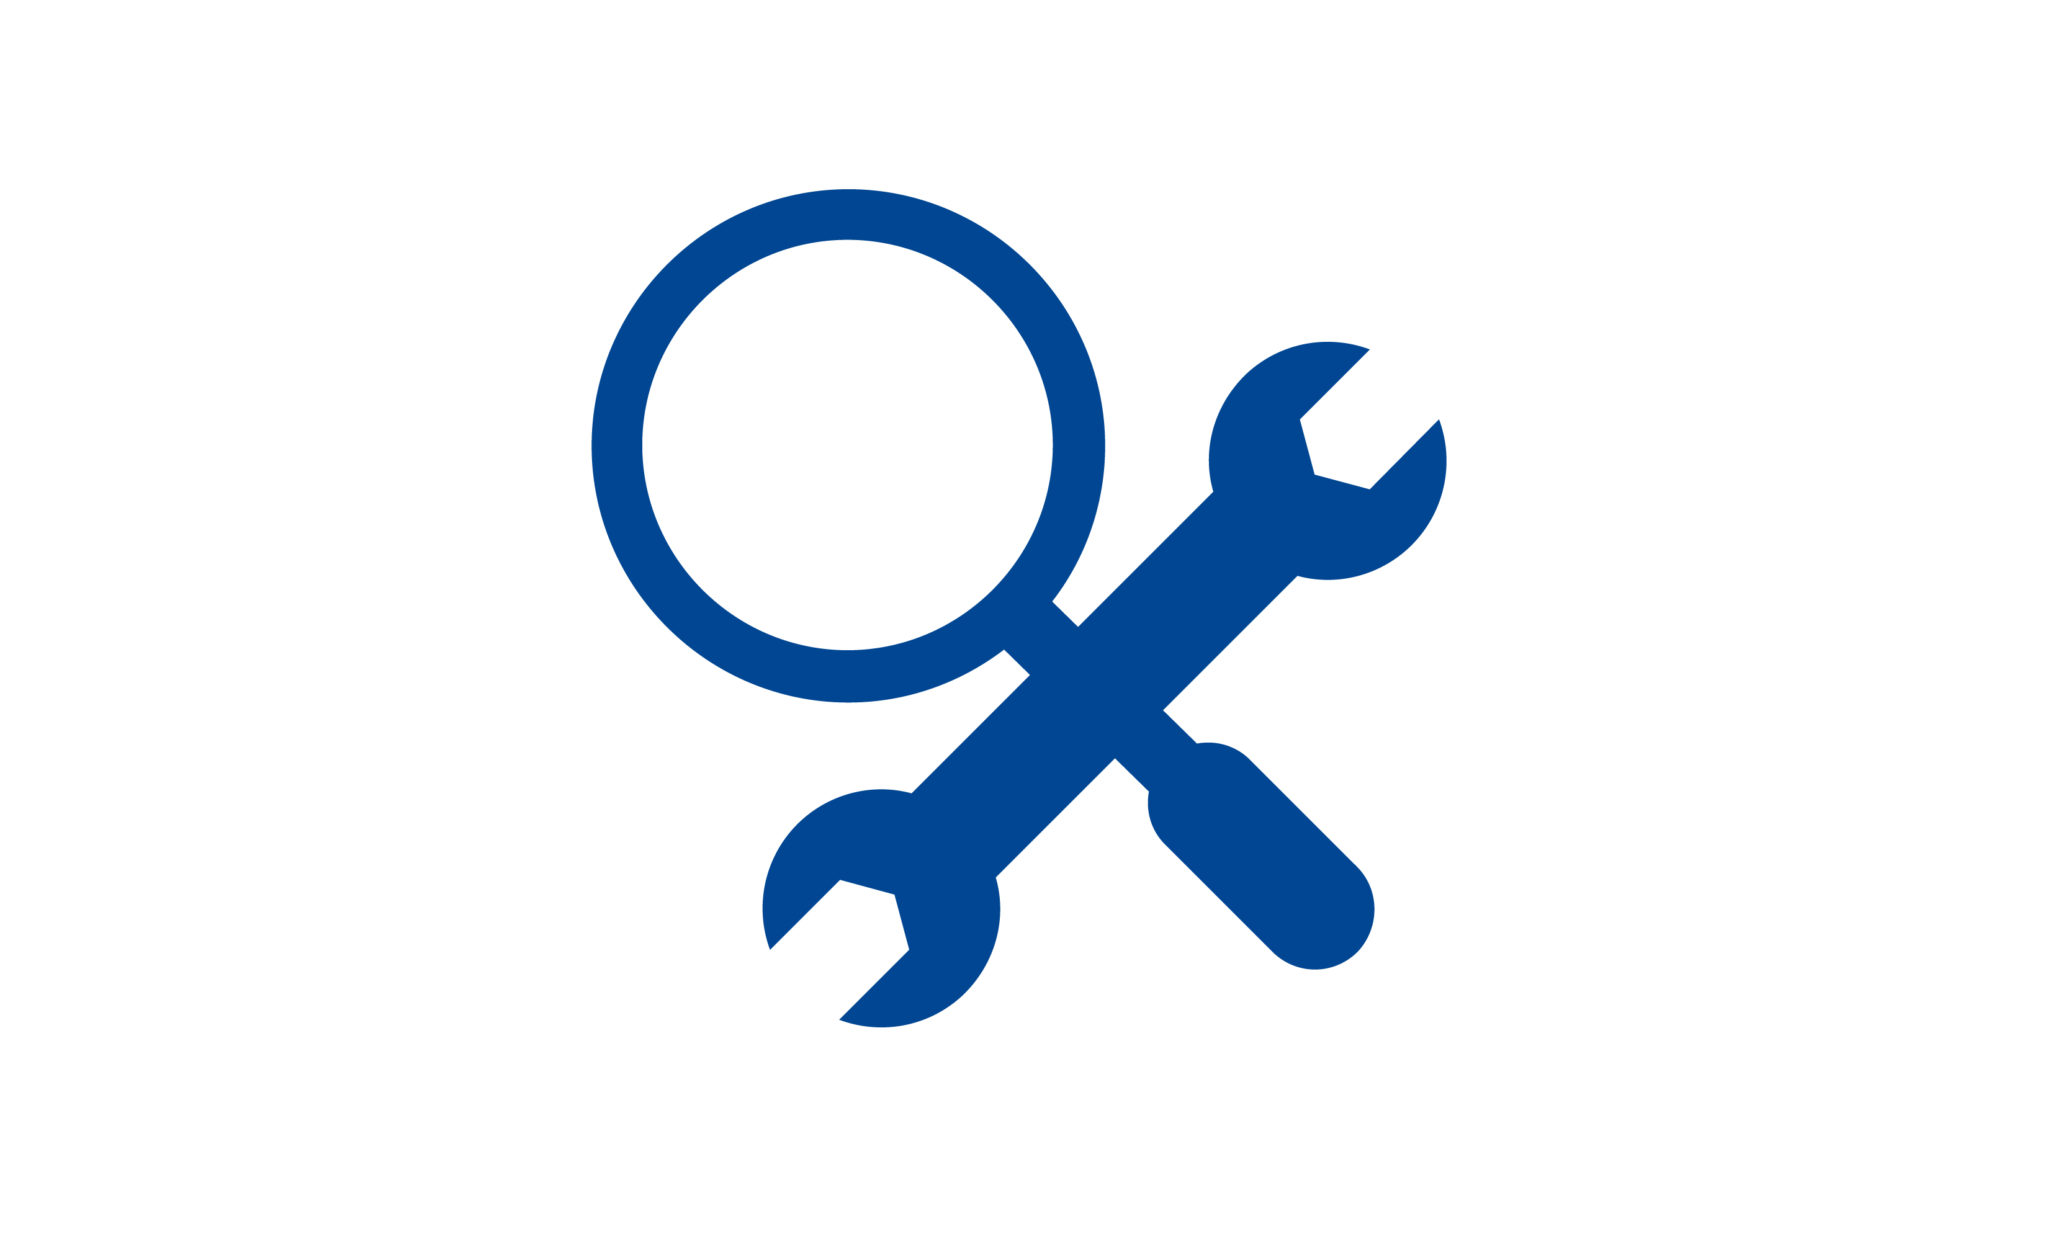 Inspection Icon